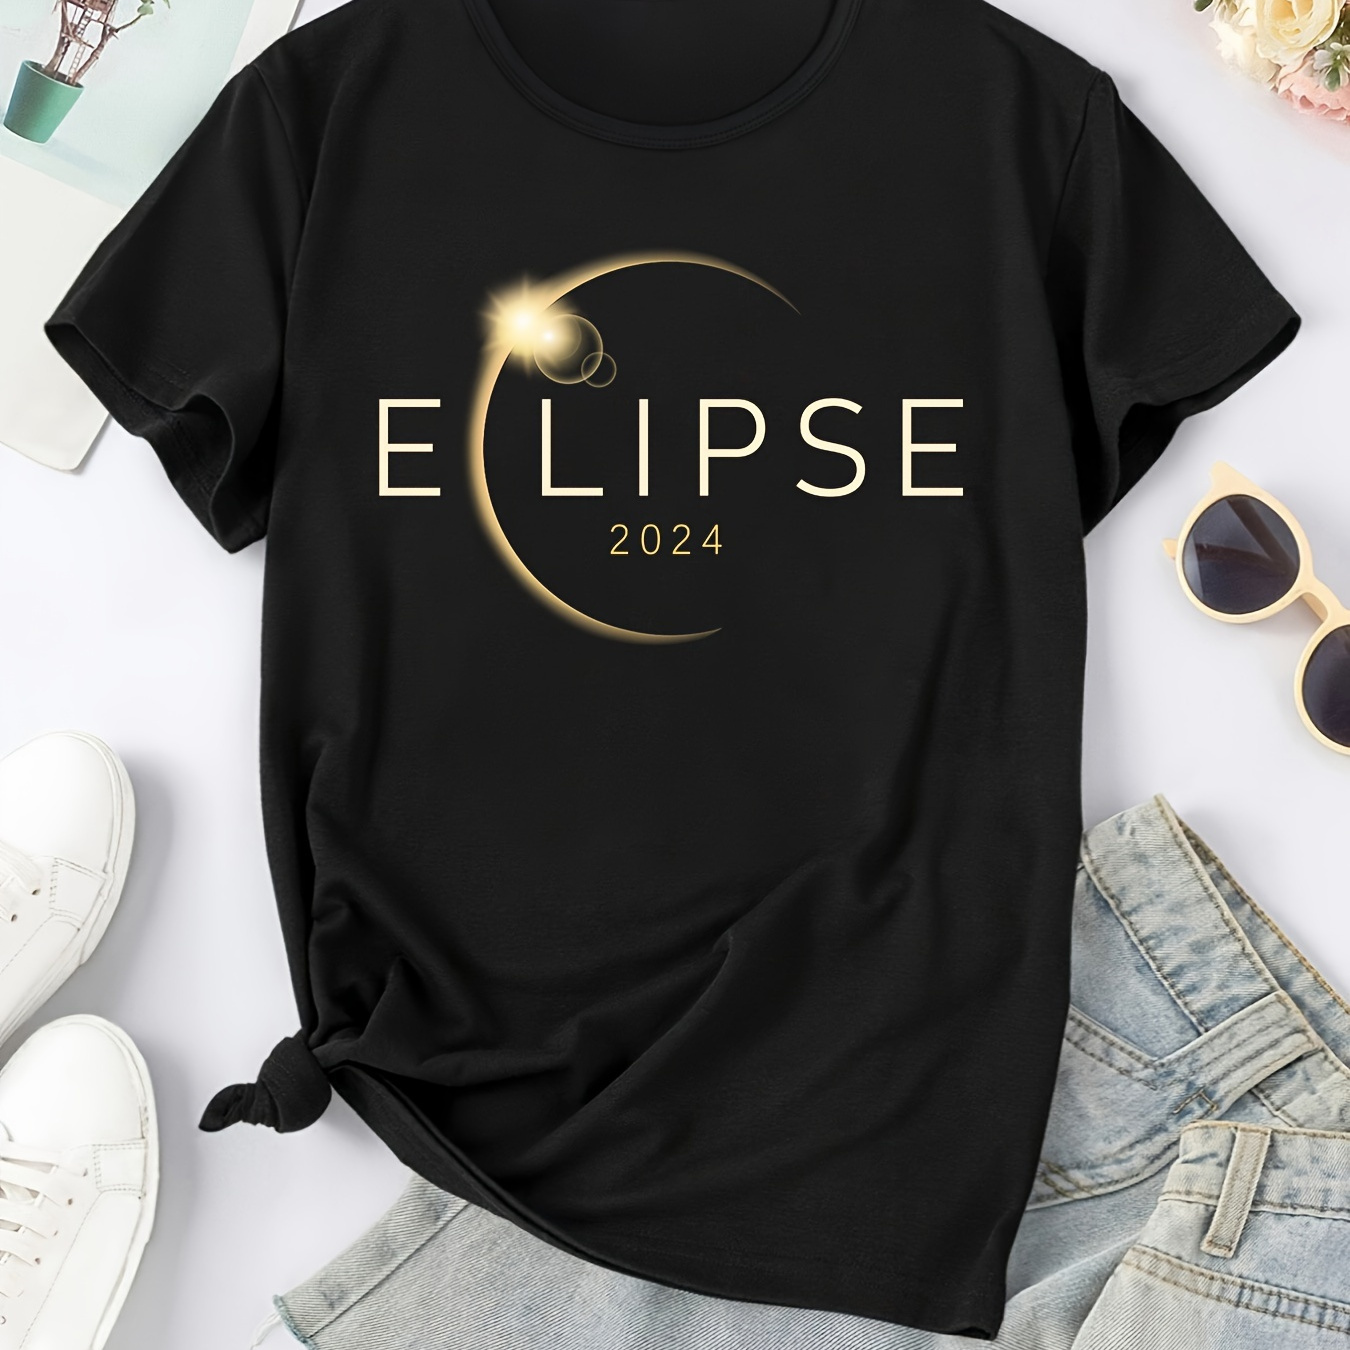 

Elipse Graphic Short Sleeve Sports T-shirt, Round Neck Casual T-shirt Top, Women's Activewear